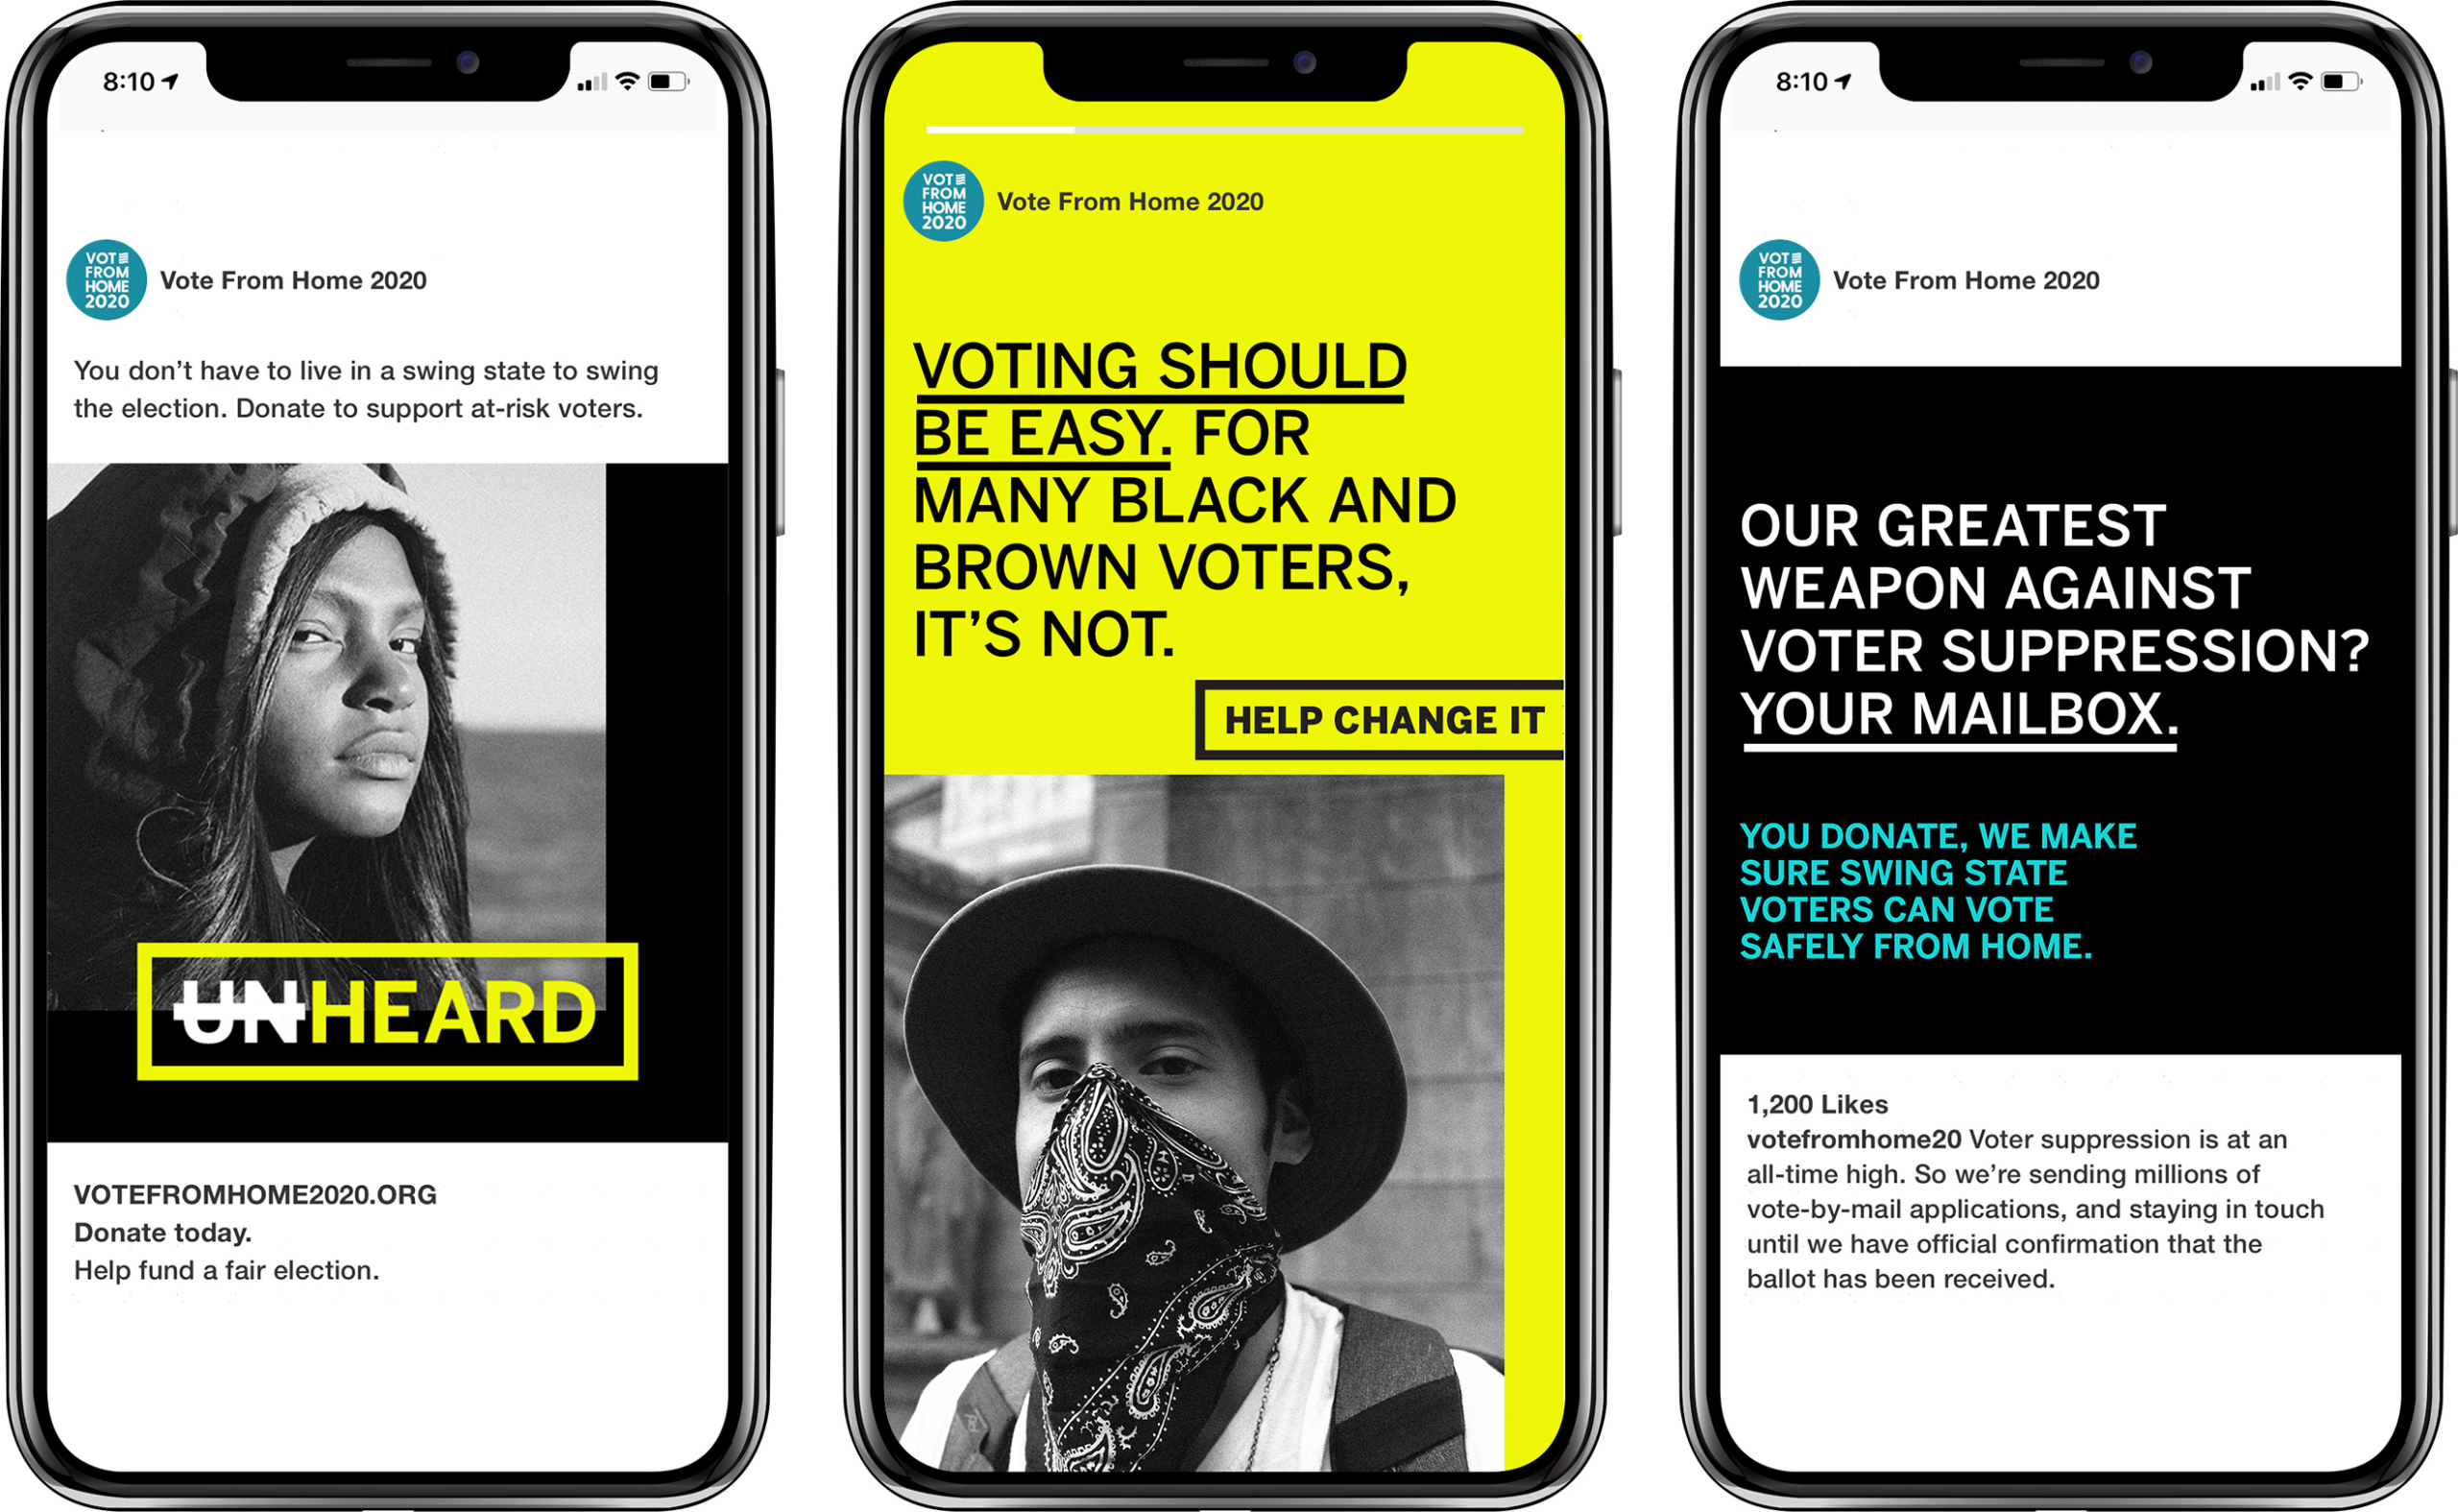 3 smart phones in a row, each with various social ads on screen. 1) "You don't have to live in a swing state to swing the election. Donate to support at-risk voters." Black and white image of BIPOC female-presenting person in hoodie. The word "UNHEARD" is overlaid in white and yellow and the letters "UN" are crossed out. "votefromhome2020.org Donate today. Help fund a fair election. 2) Yellow background social story post that reads" voting should be easy. for many black and brown voters, it's not. HELP CHANGE IT." With Black and white photo of BIPOC male-presenting person wearing a bandana as a face mask over mouth and nose. 3) Black background with words "Our greatest weapon against voter suppression? your mailbox. You donate, we make sure swing state voters can vote safely from home." post copy below reads "Voter supression is at an all time high. So we're sending millions of vote-by-mail applications, and staying in touch until we have official confirmation that the ballot has been received."